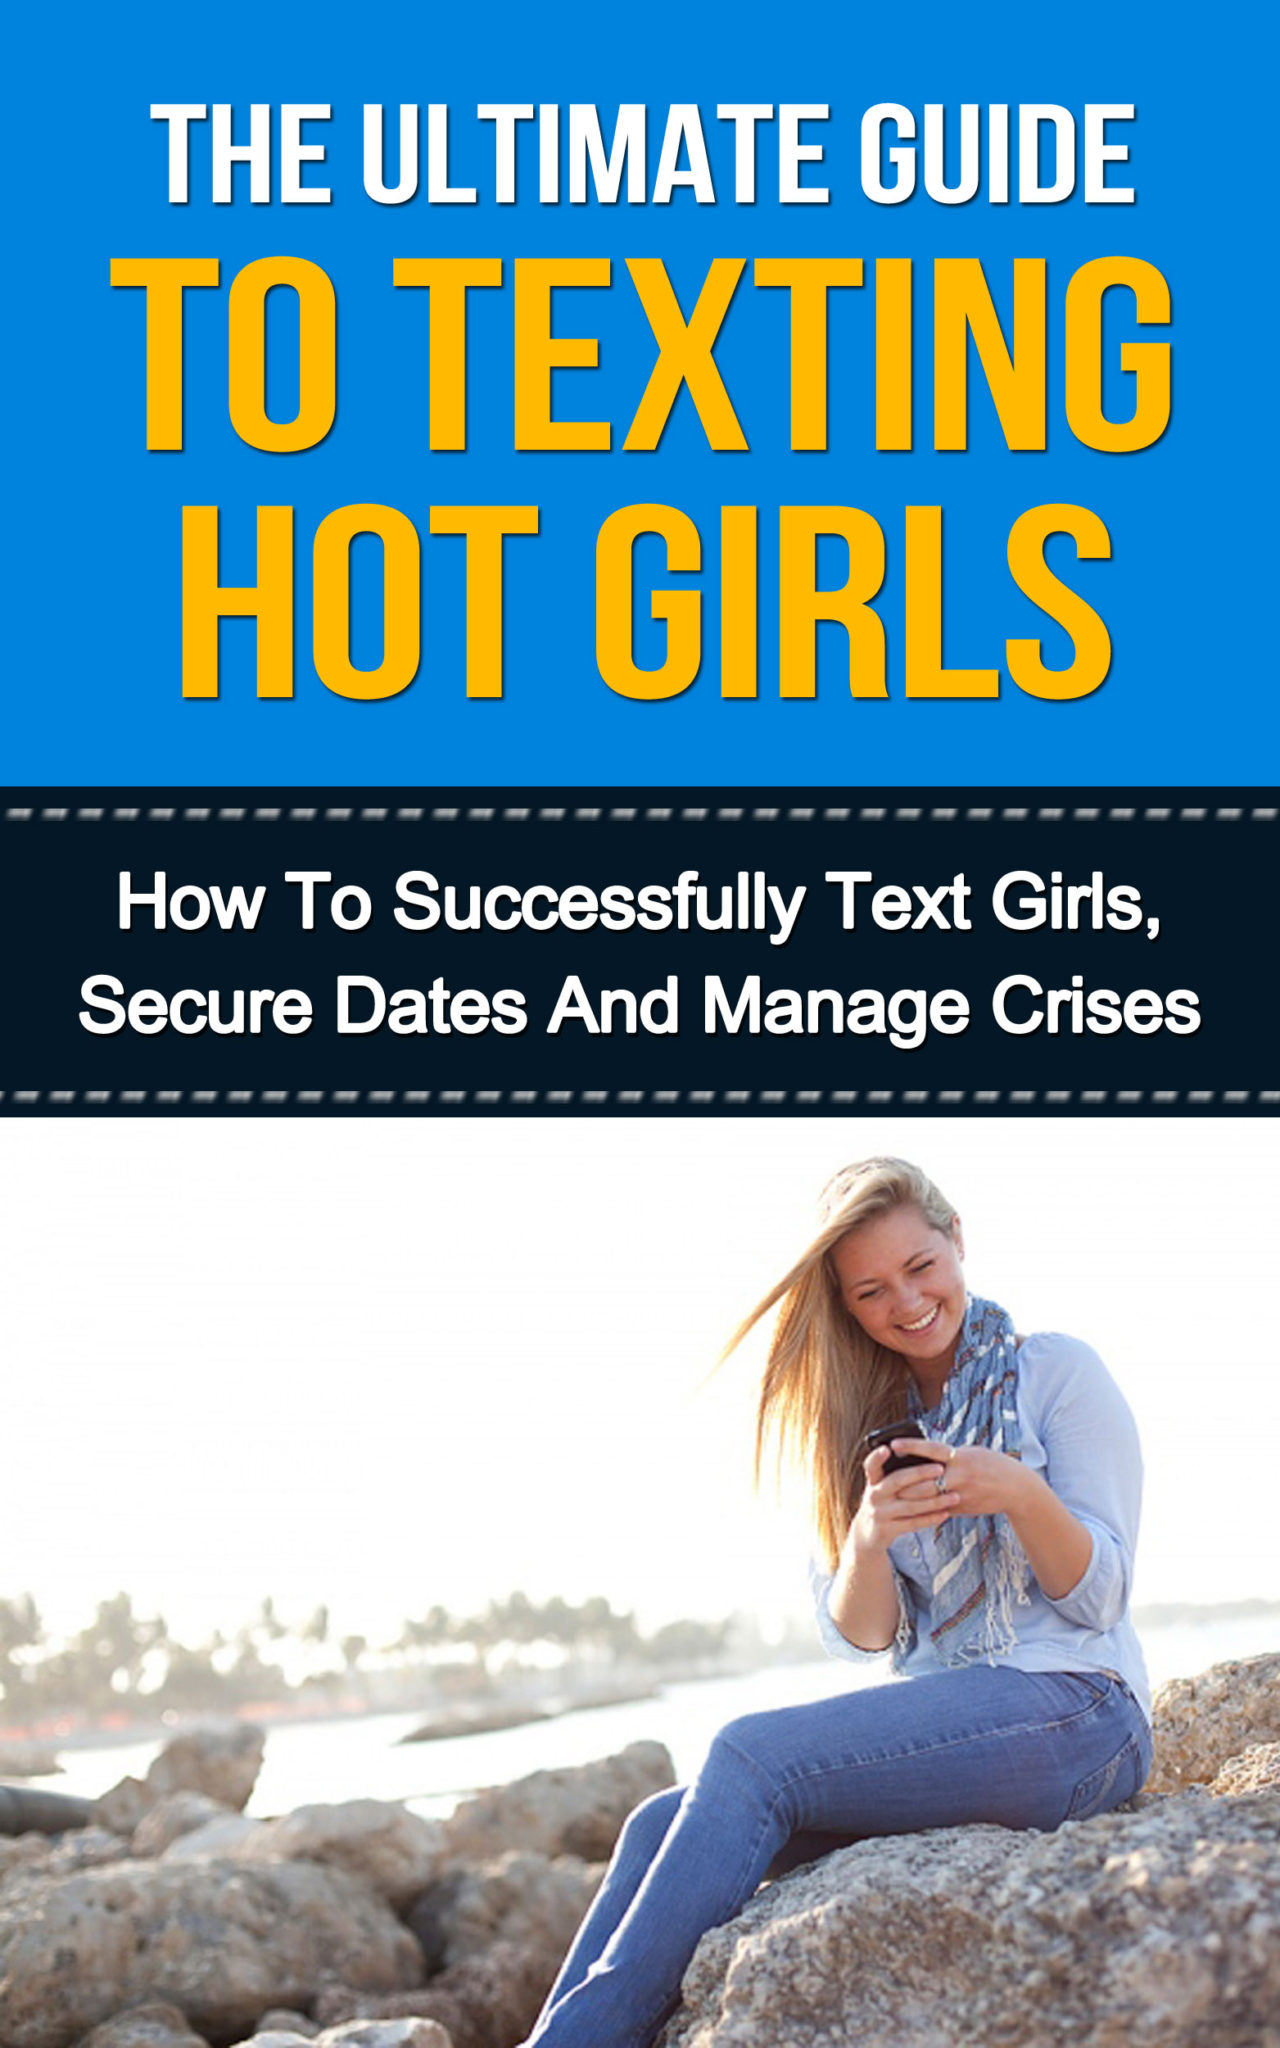 FREE: http://www.amazon.com/Ultimate-Guide-Texting-Hot-Girls-ebook/dp/B00UK59R8Q by Morris Brookes